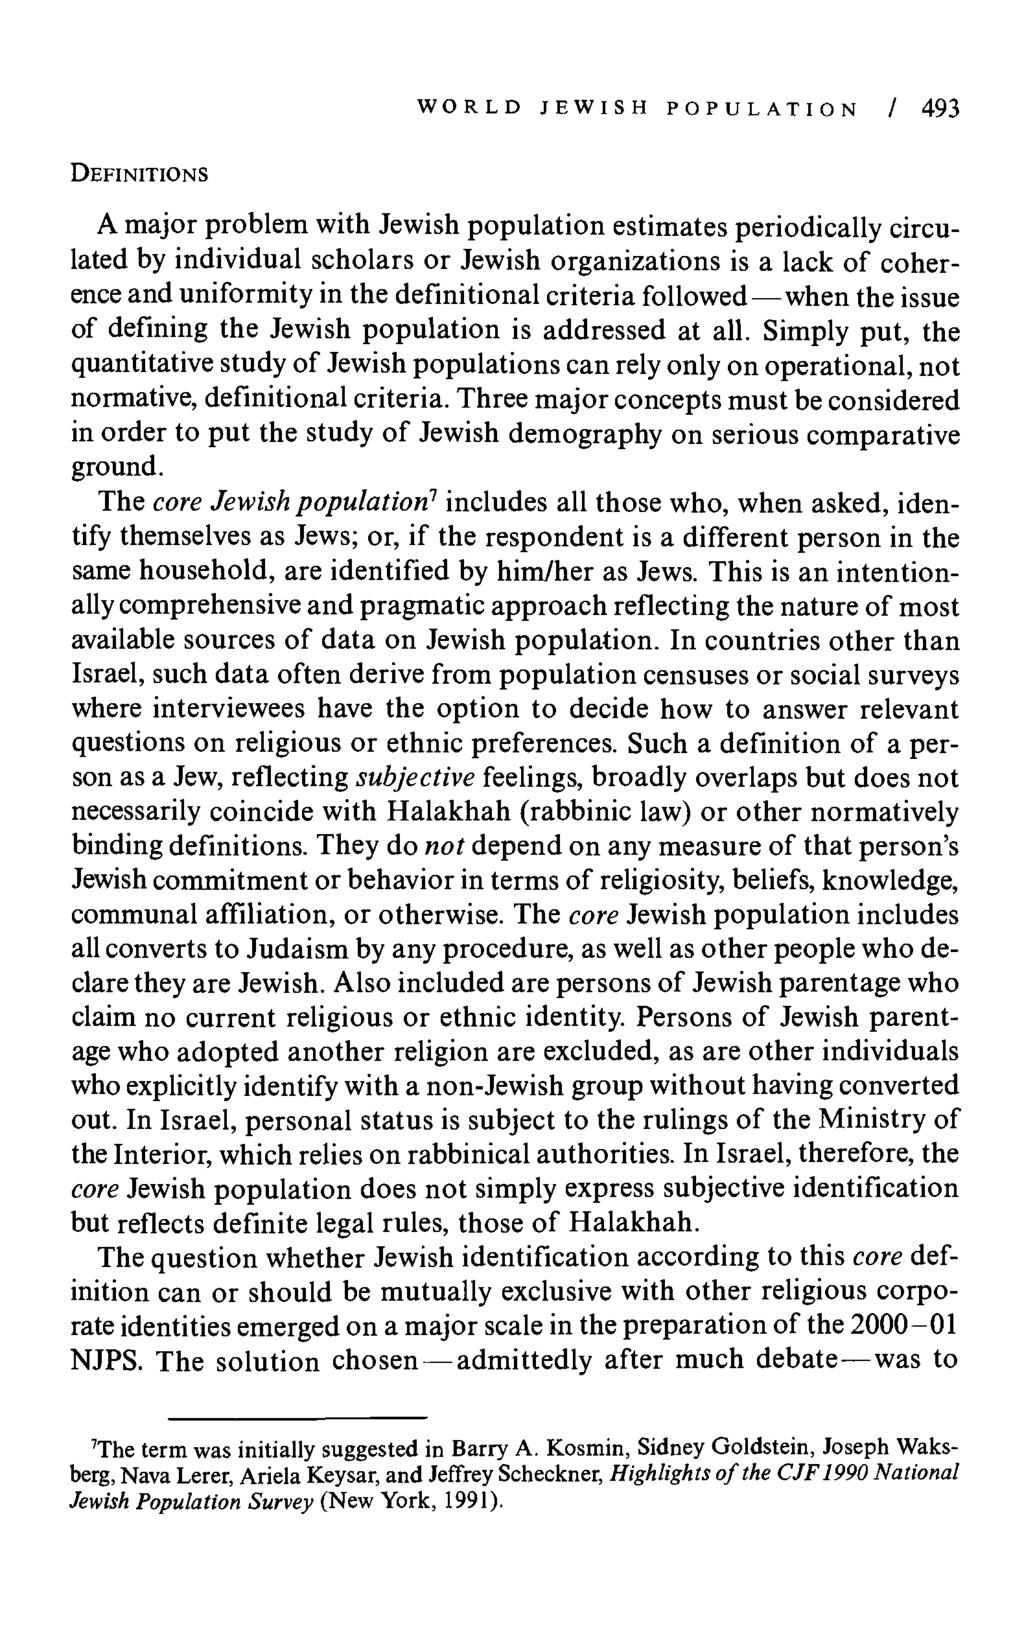 WORLD JEWISH POPULATION / 493 DEFINITIONS A major problem with Jewish population estimates periodically circulated by individual scholars or Jewish organizations is a lack of coherence and uniformity